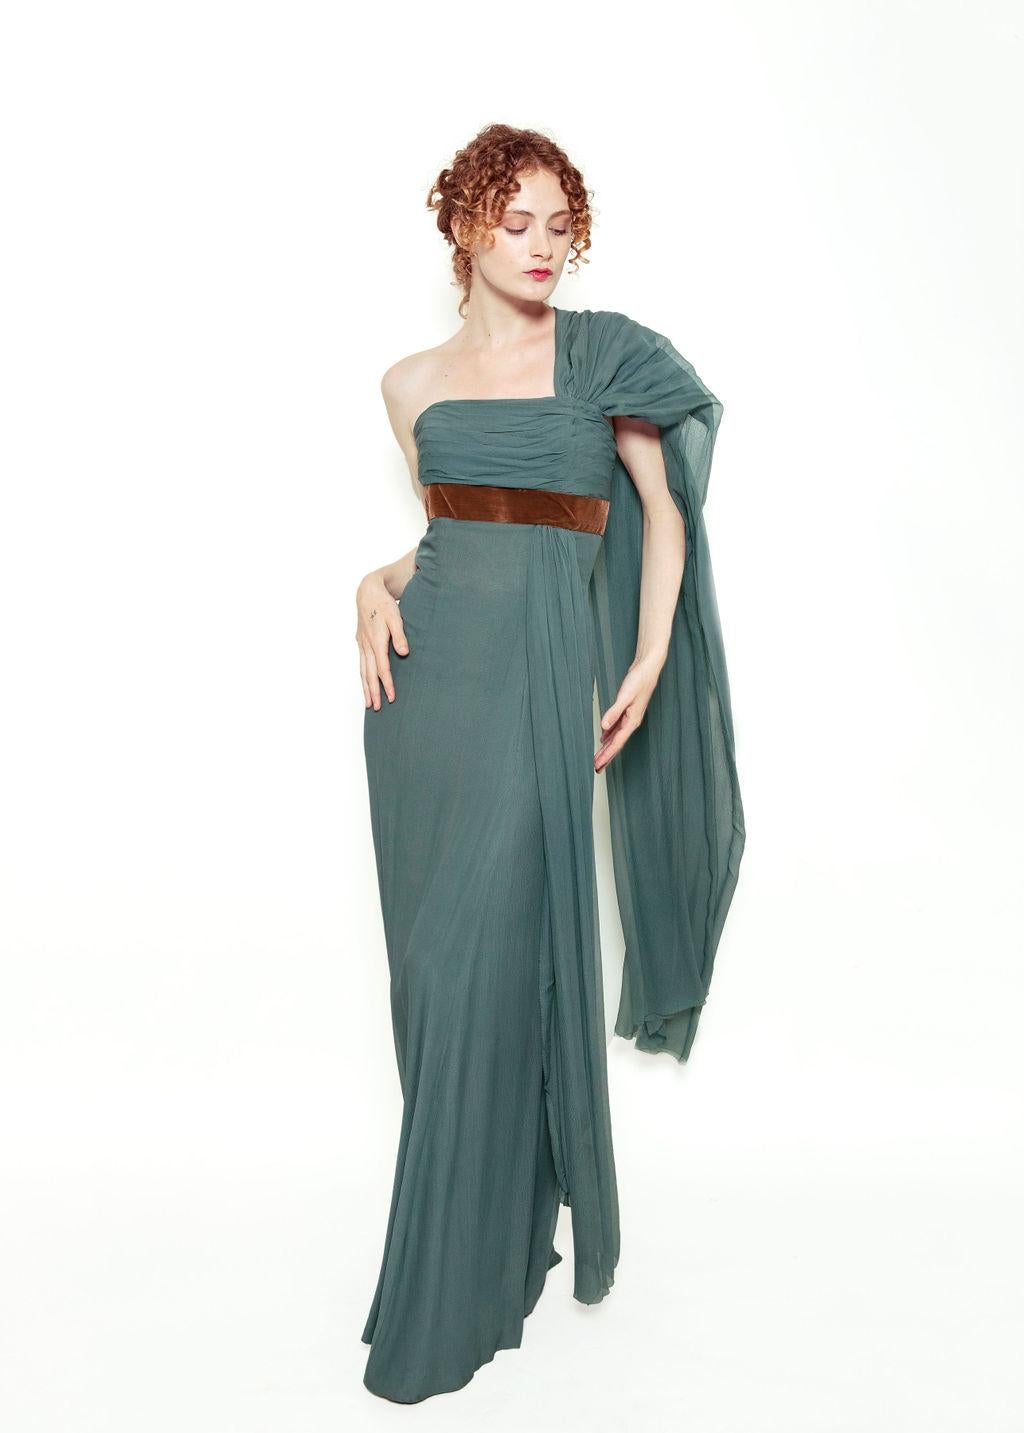 Turn heads and make a statement in this one-of-a-kind Custom Dress that was made for the Queens Maiden of Sweden, Birget Pontin. 

Featuring a stunning blue silk chiffon and brown velvet waist to create the perfect hourglass silhouette.  It has a